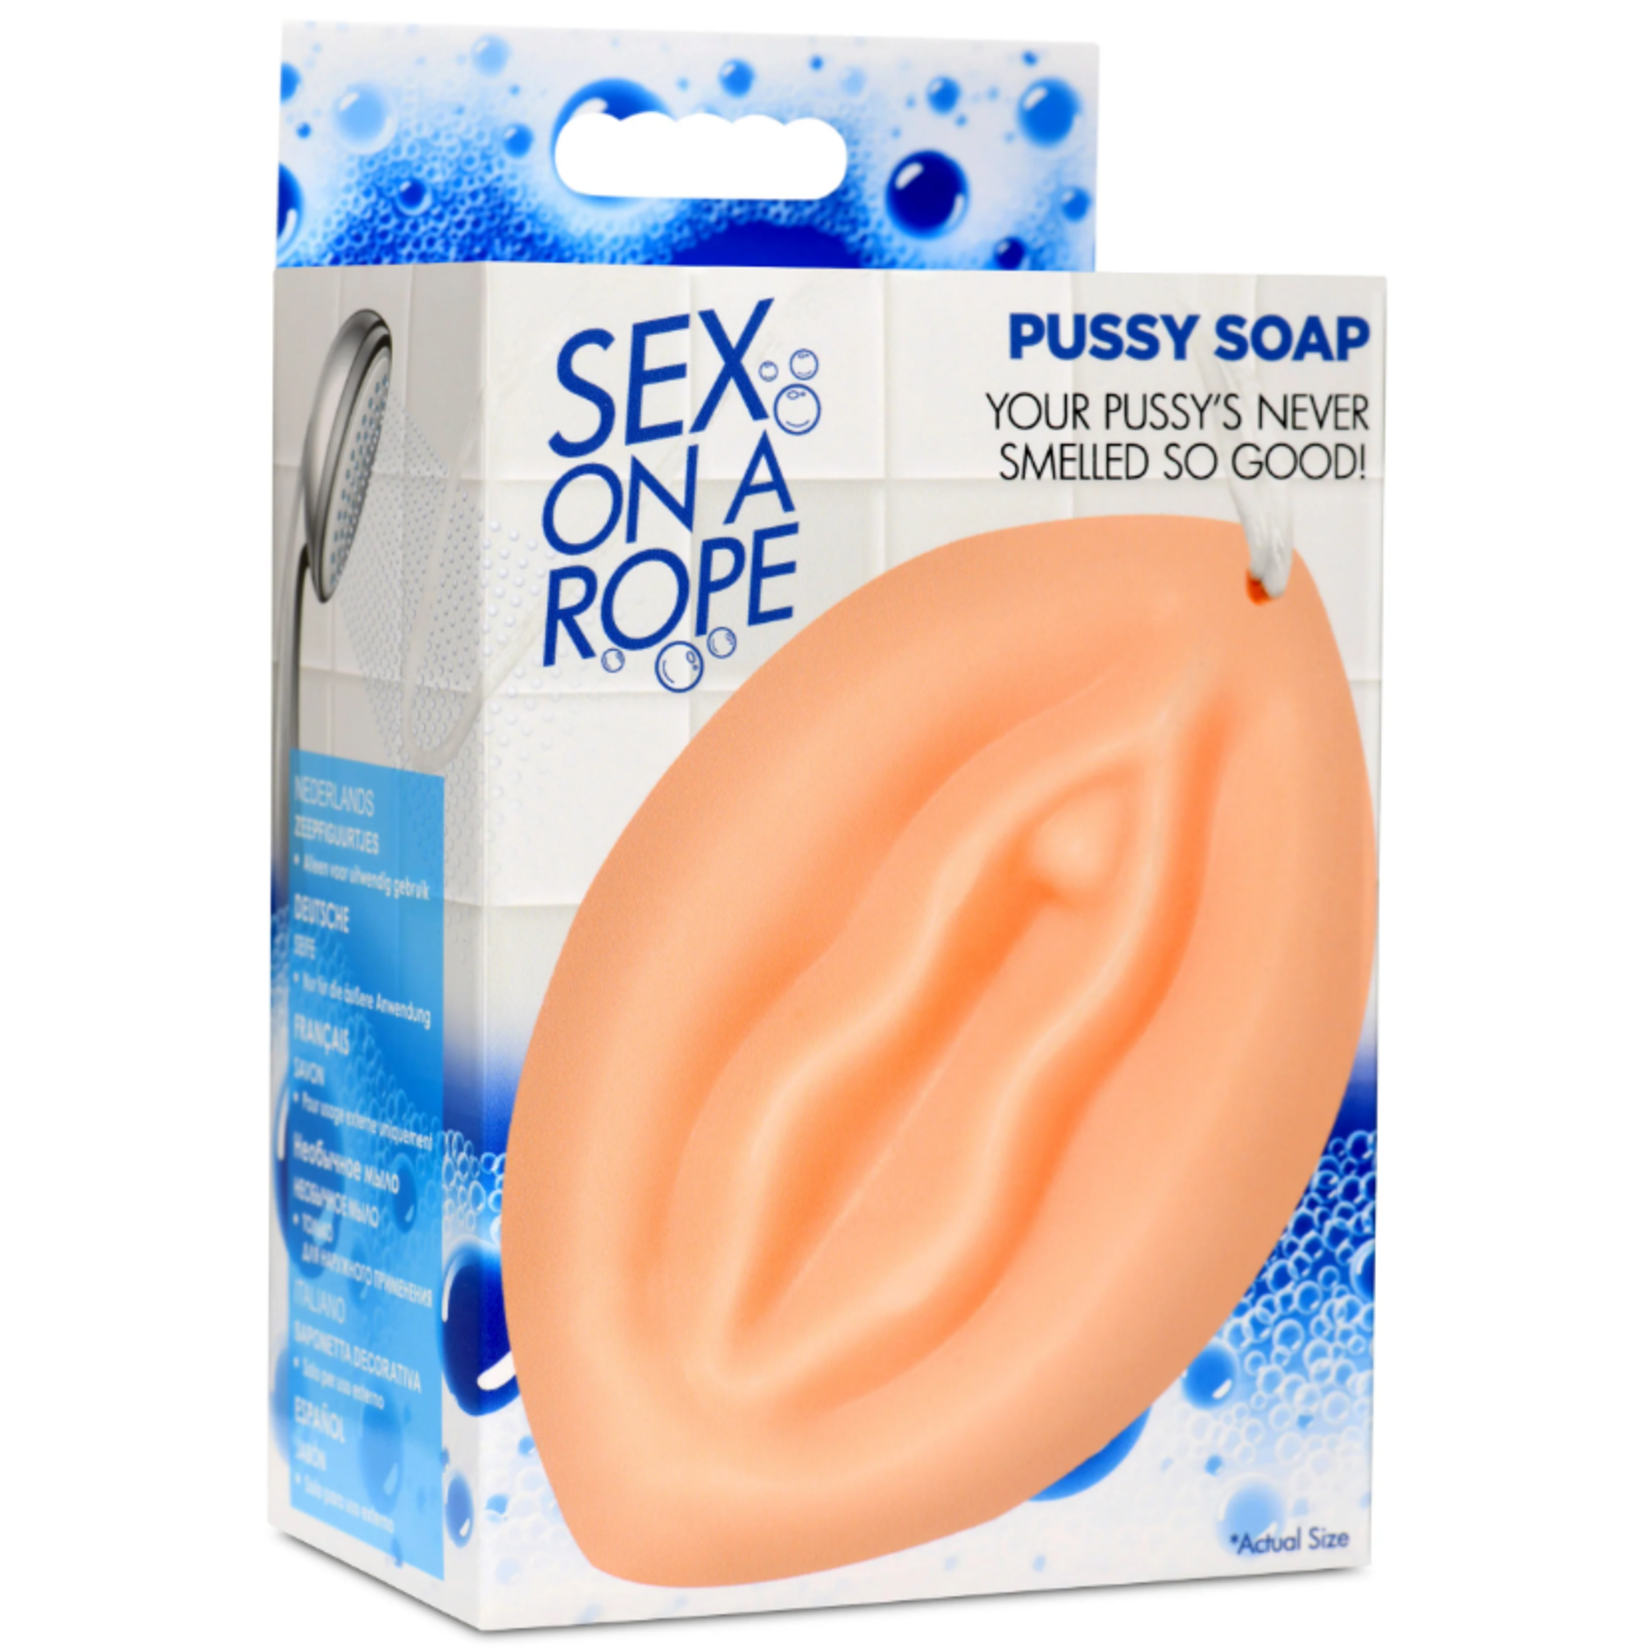 SEX ON A ROPE - PUSSY SOAP